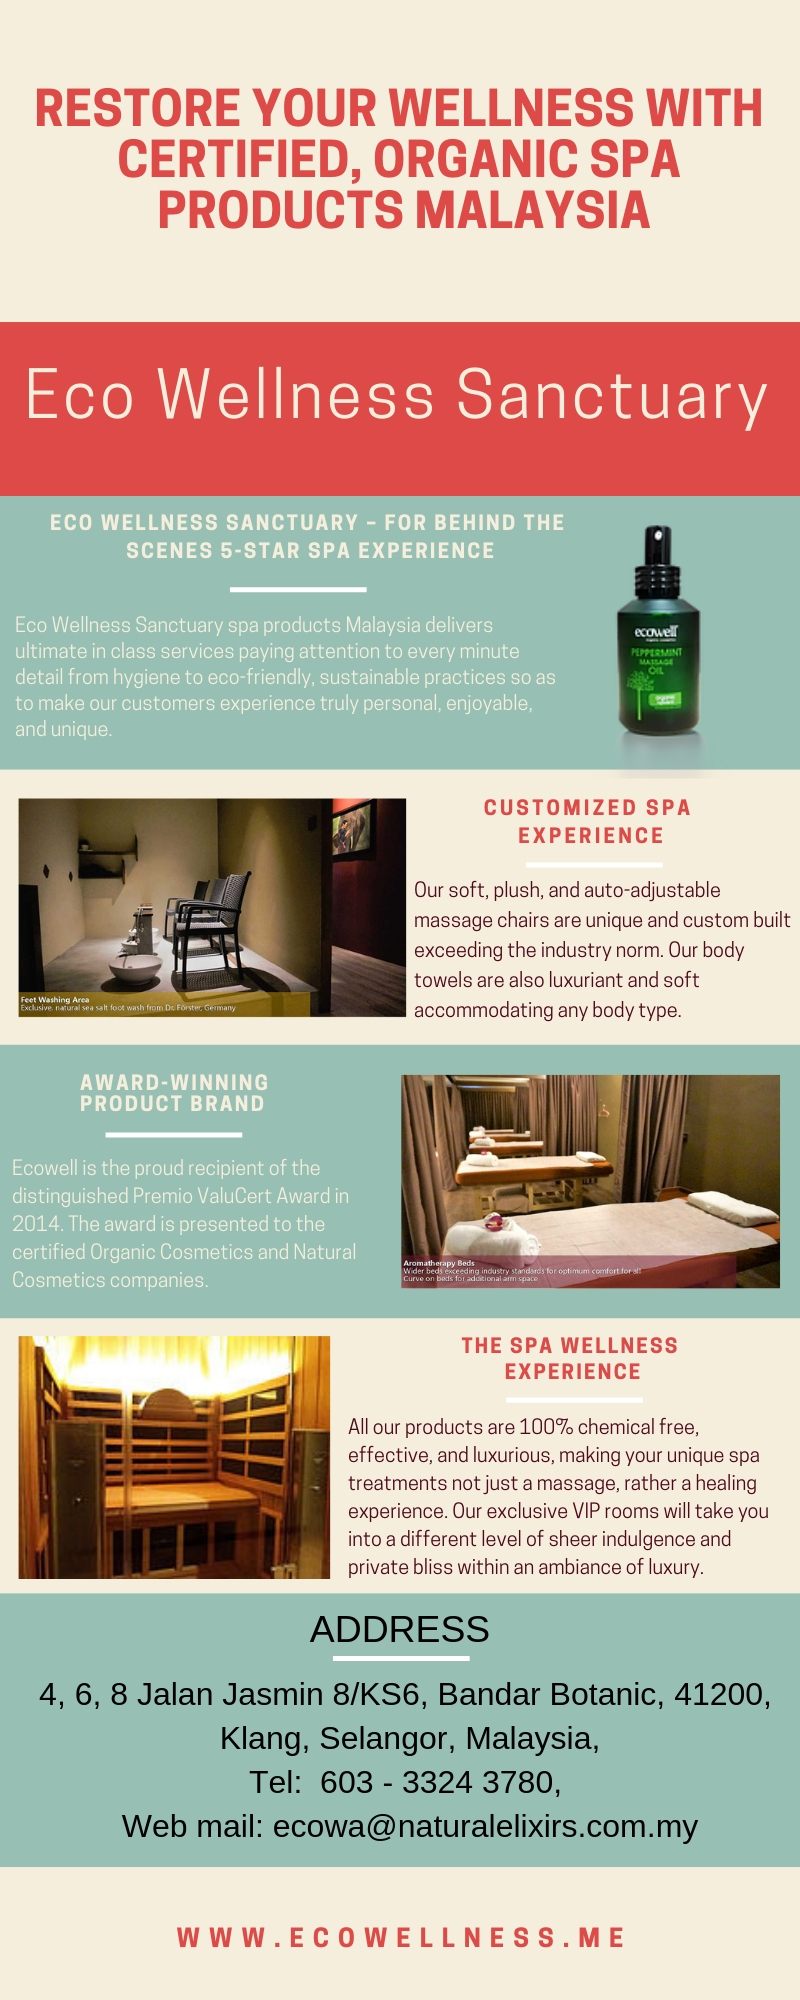 Restore Your Wellness with Certified, Organic Spa Products Malaysia.jpg  by ecowellness15